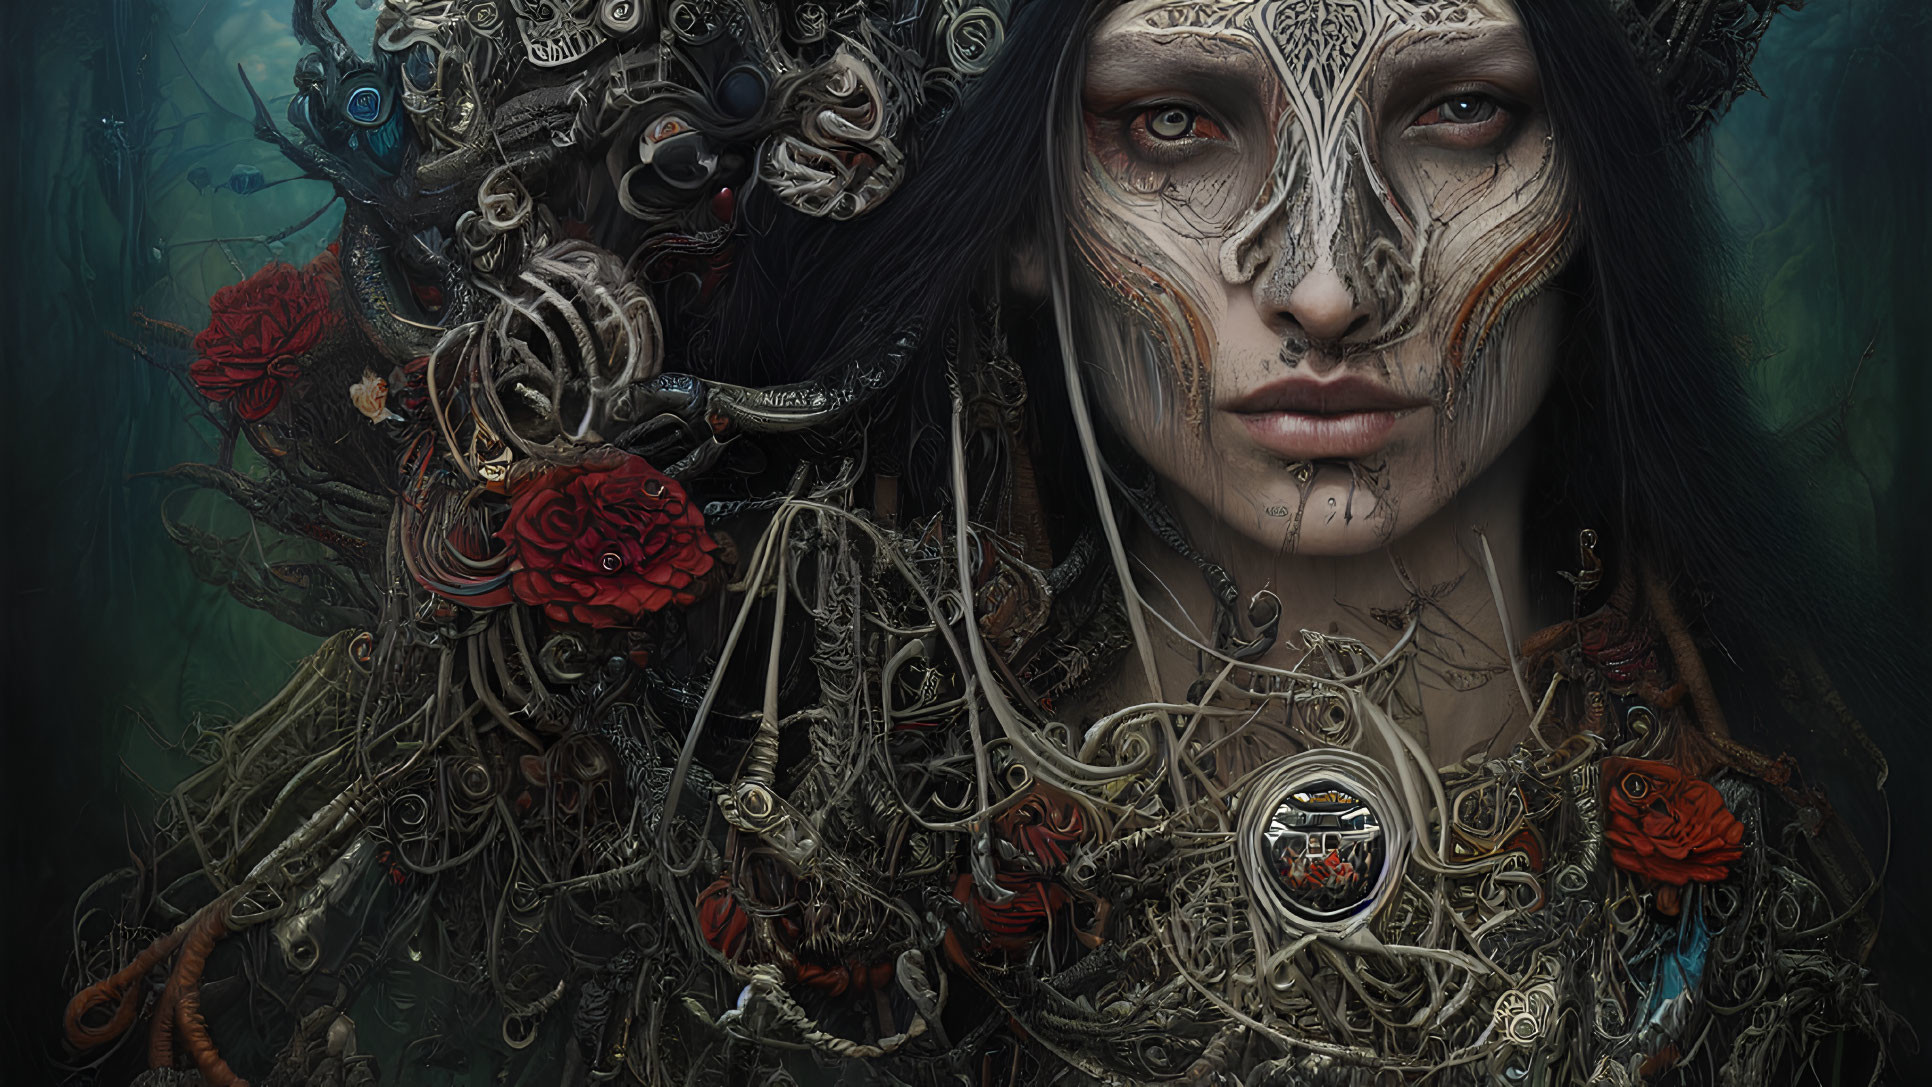 Digital artwork featuring person with intricate tattoos and mechanical adornments intertwined with red roses on dark backdrop